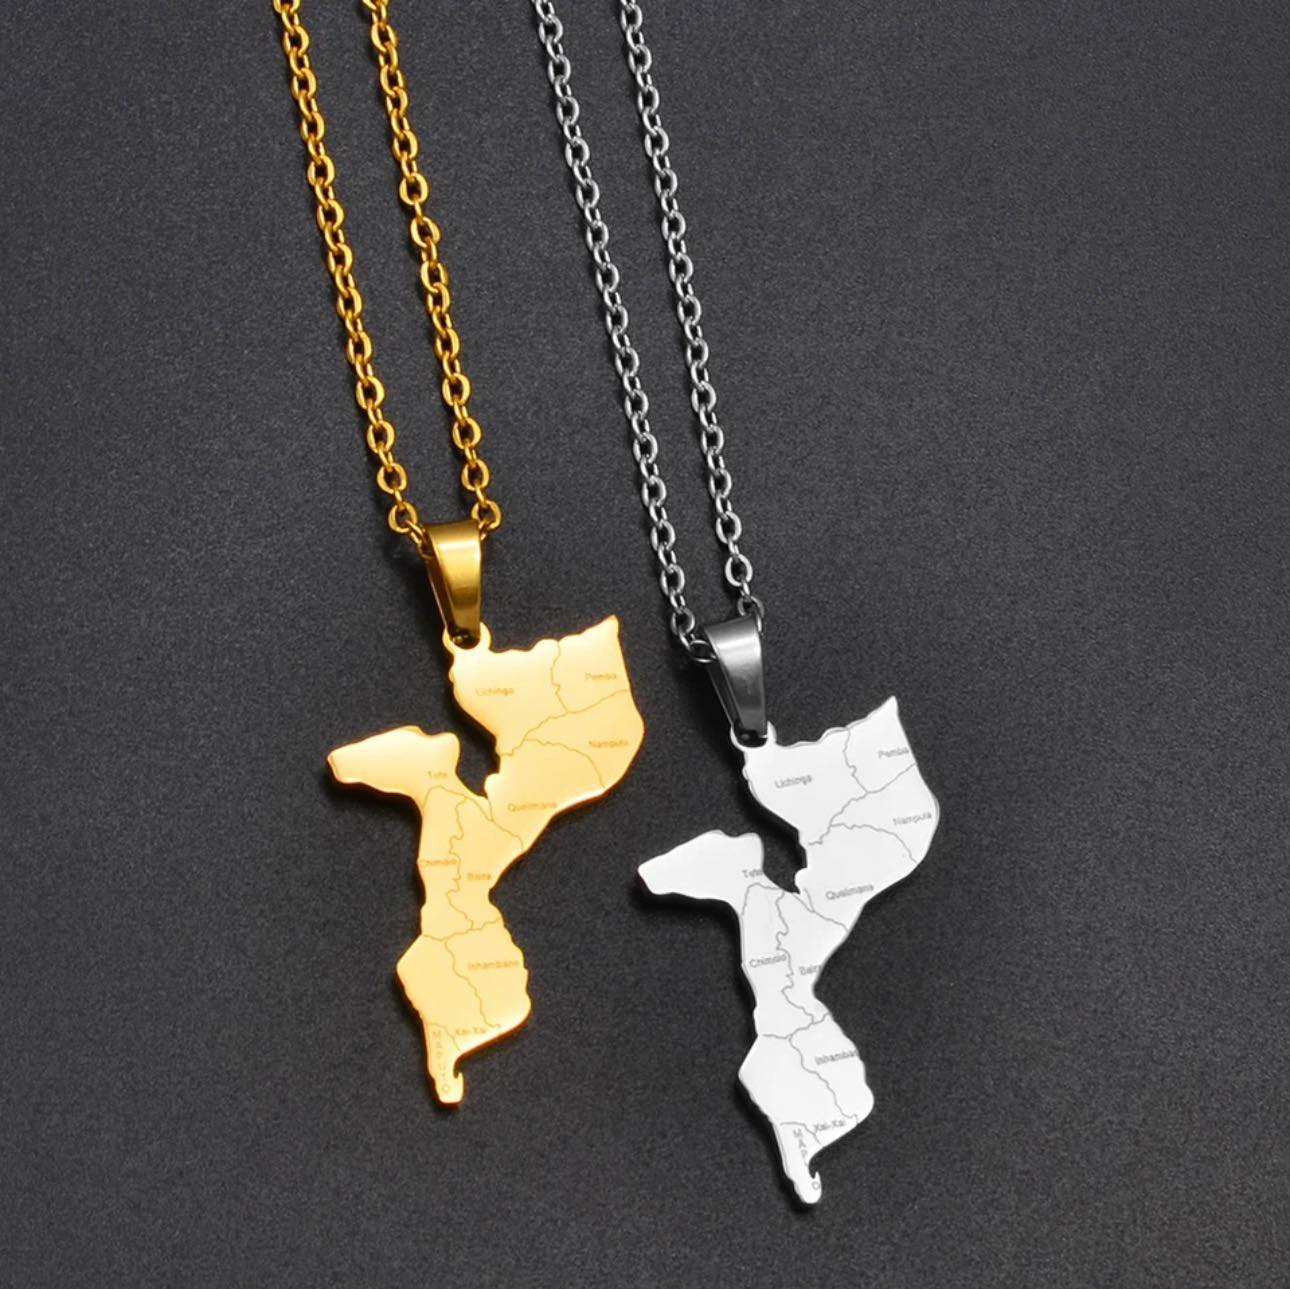 Mozambique Map & Cities Necklace